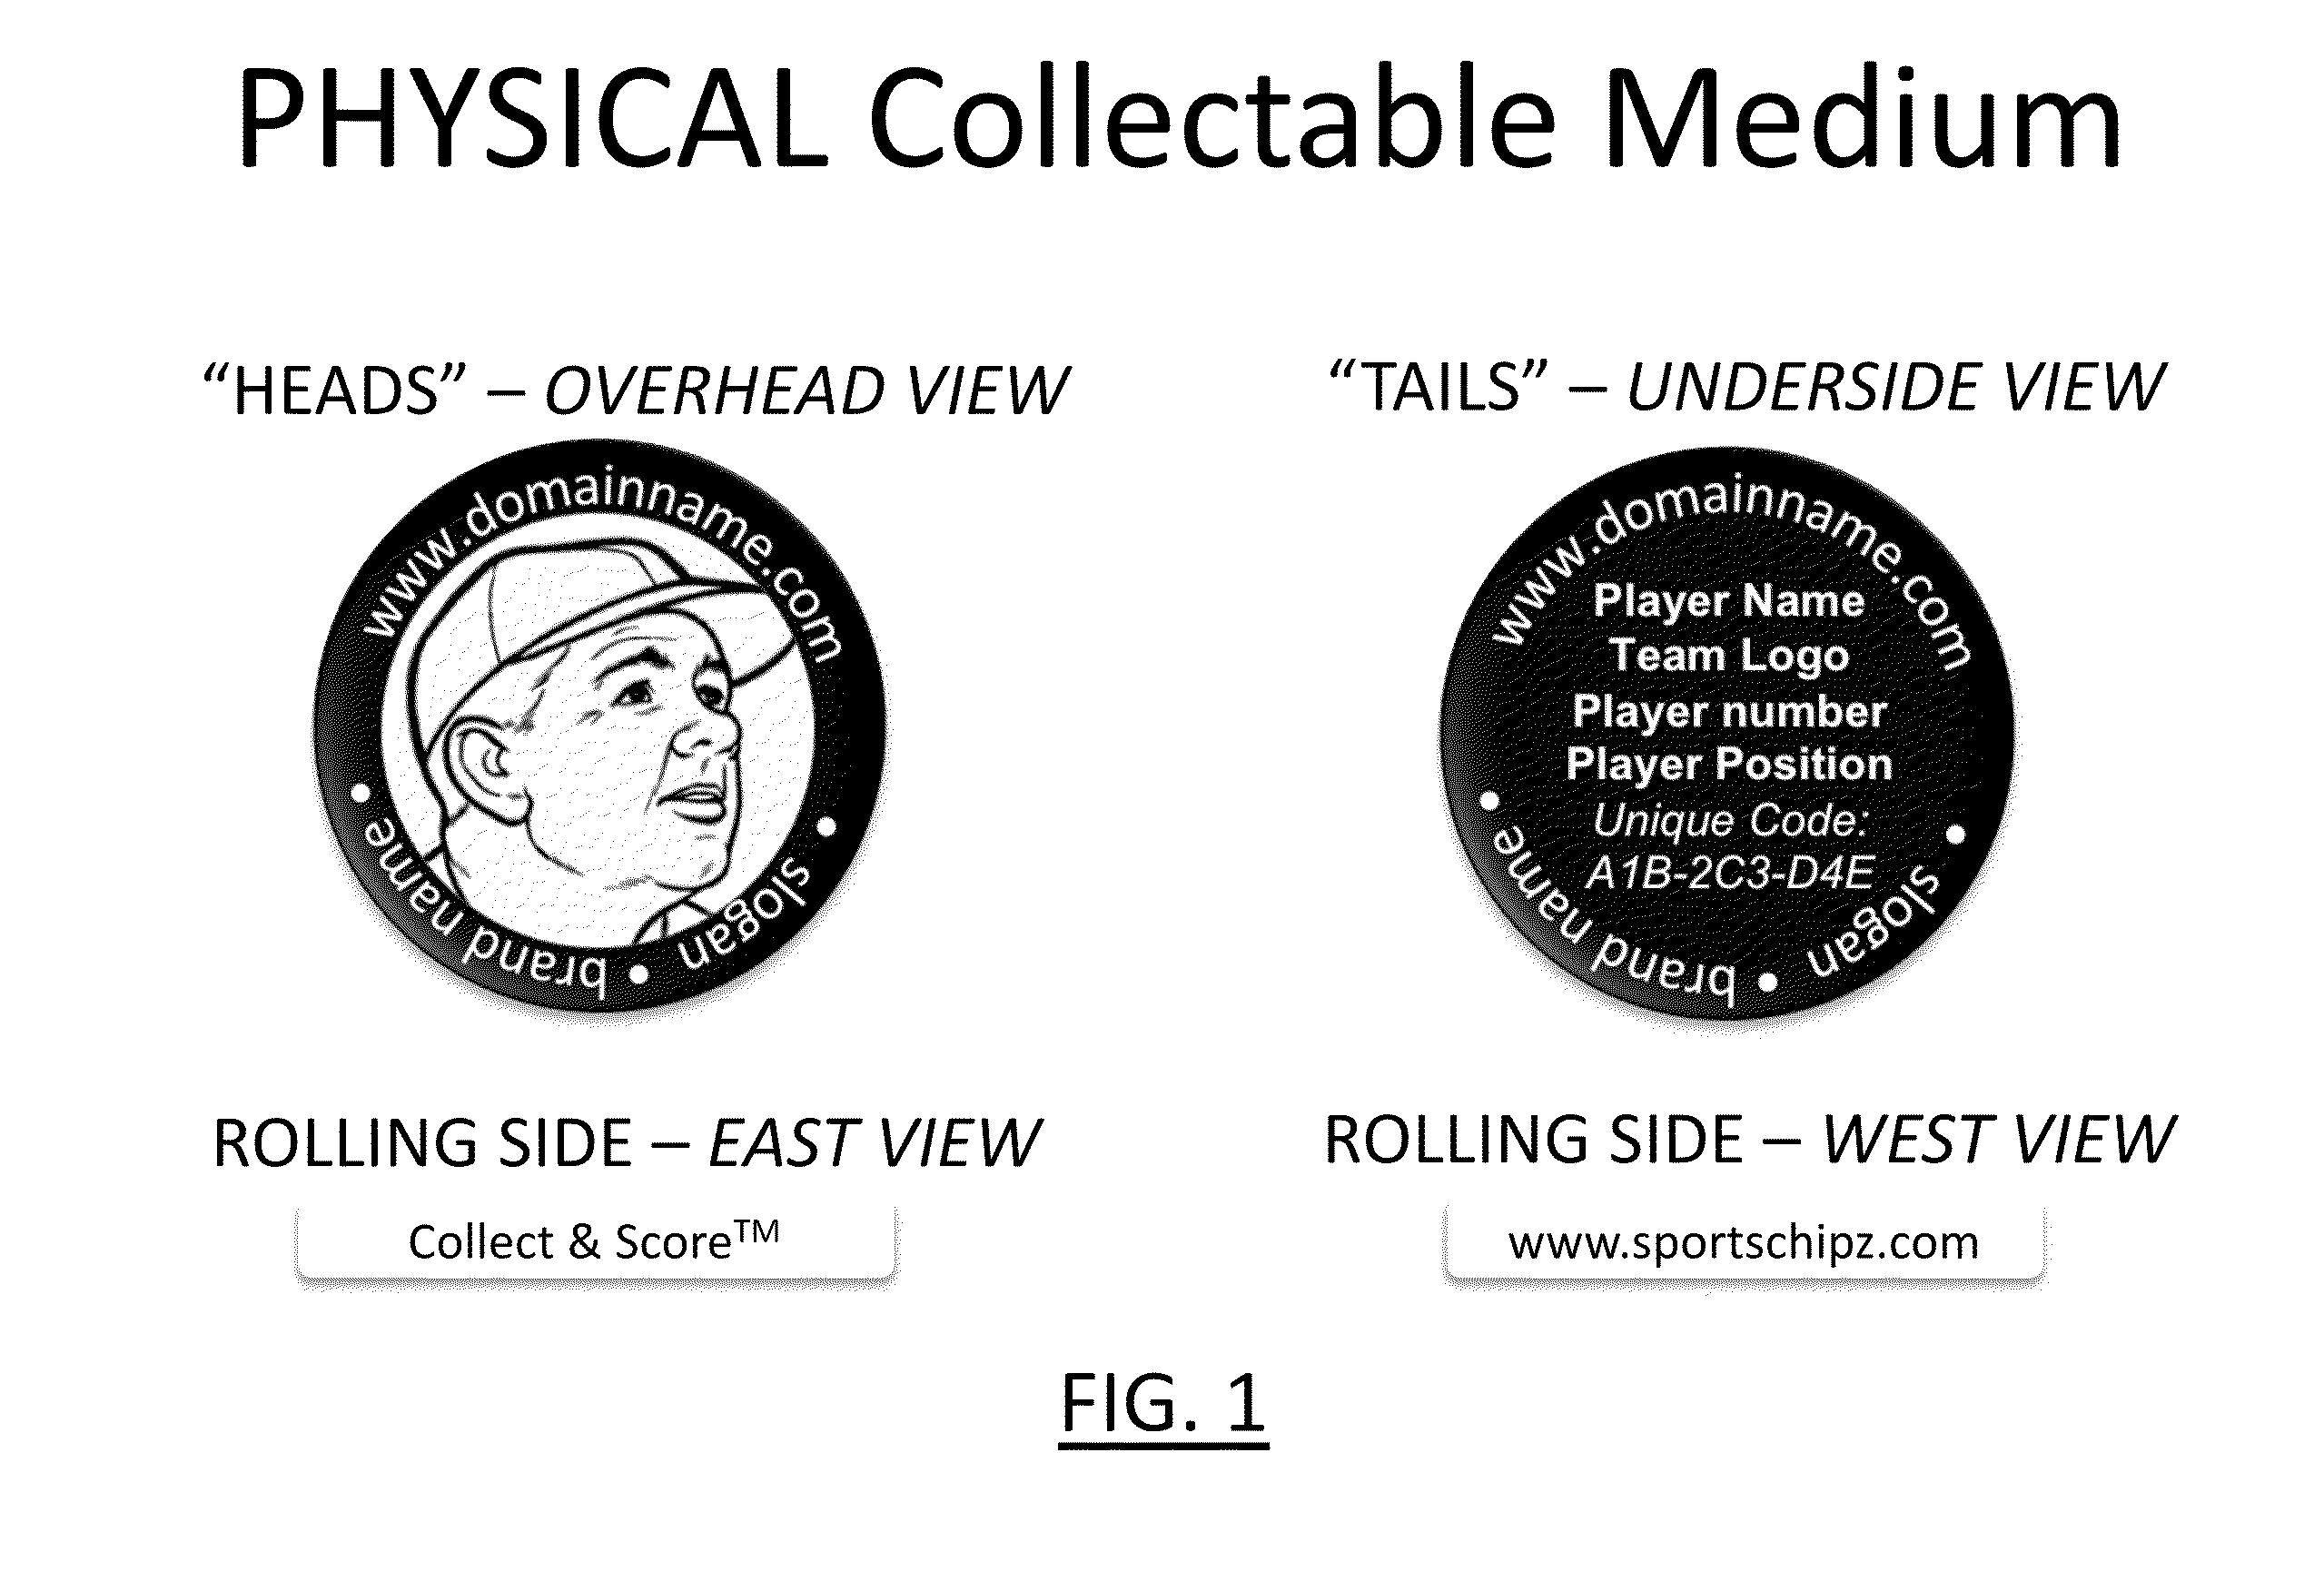 System for collectable medium